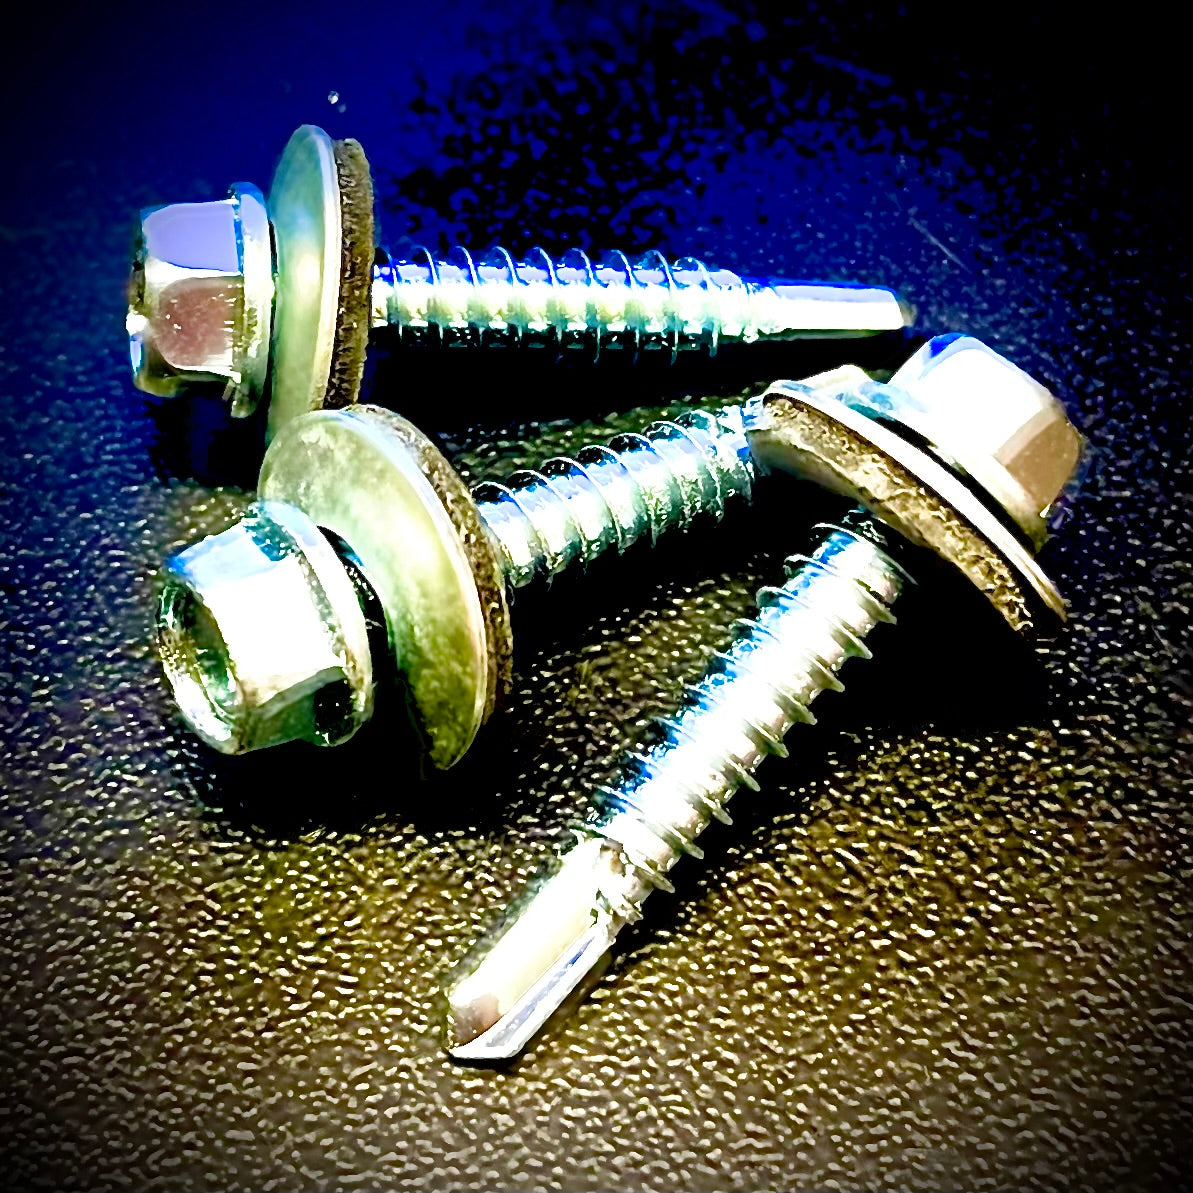 Roofing Cladding Self Drilling Screw EPDM Washer Light - Fixaball Ltd. Fixings and Fasteners UK